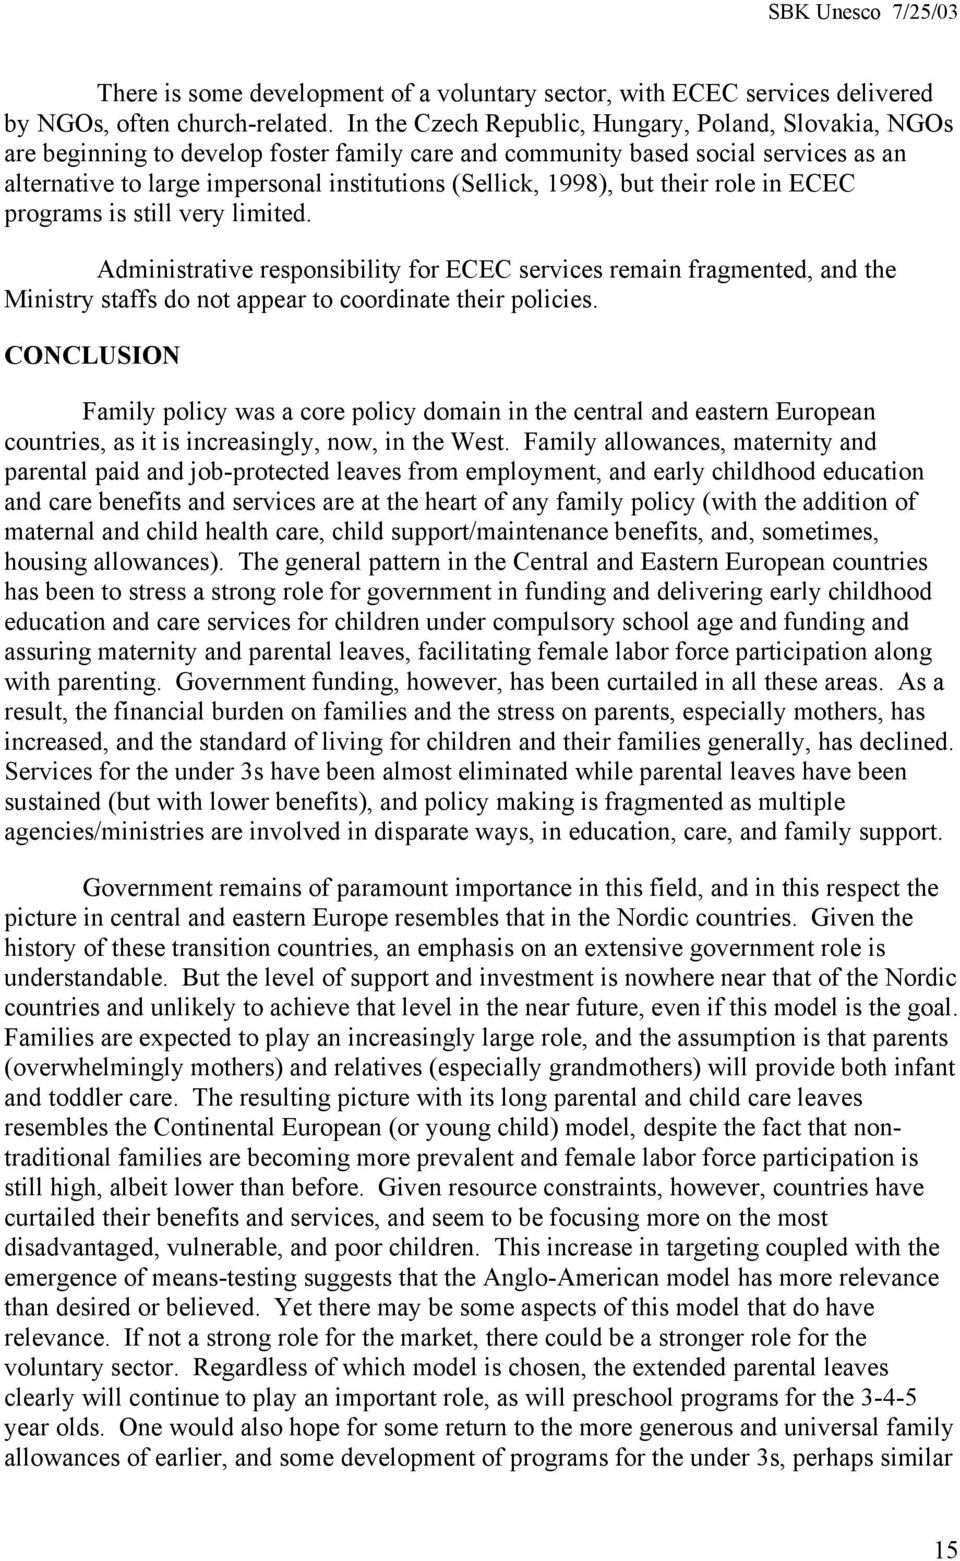 1998), but their role in ECEC programs is still very limited. Administrative responsibility for ECEC services remain fragmented, and the Ministry staffs do not appear to coordinate their policies.